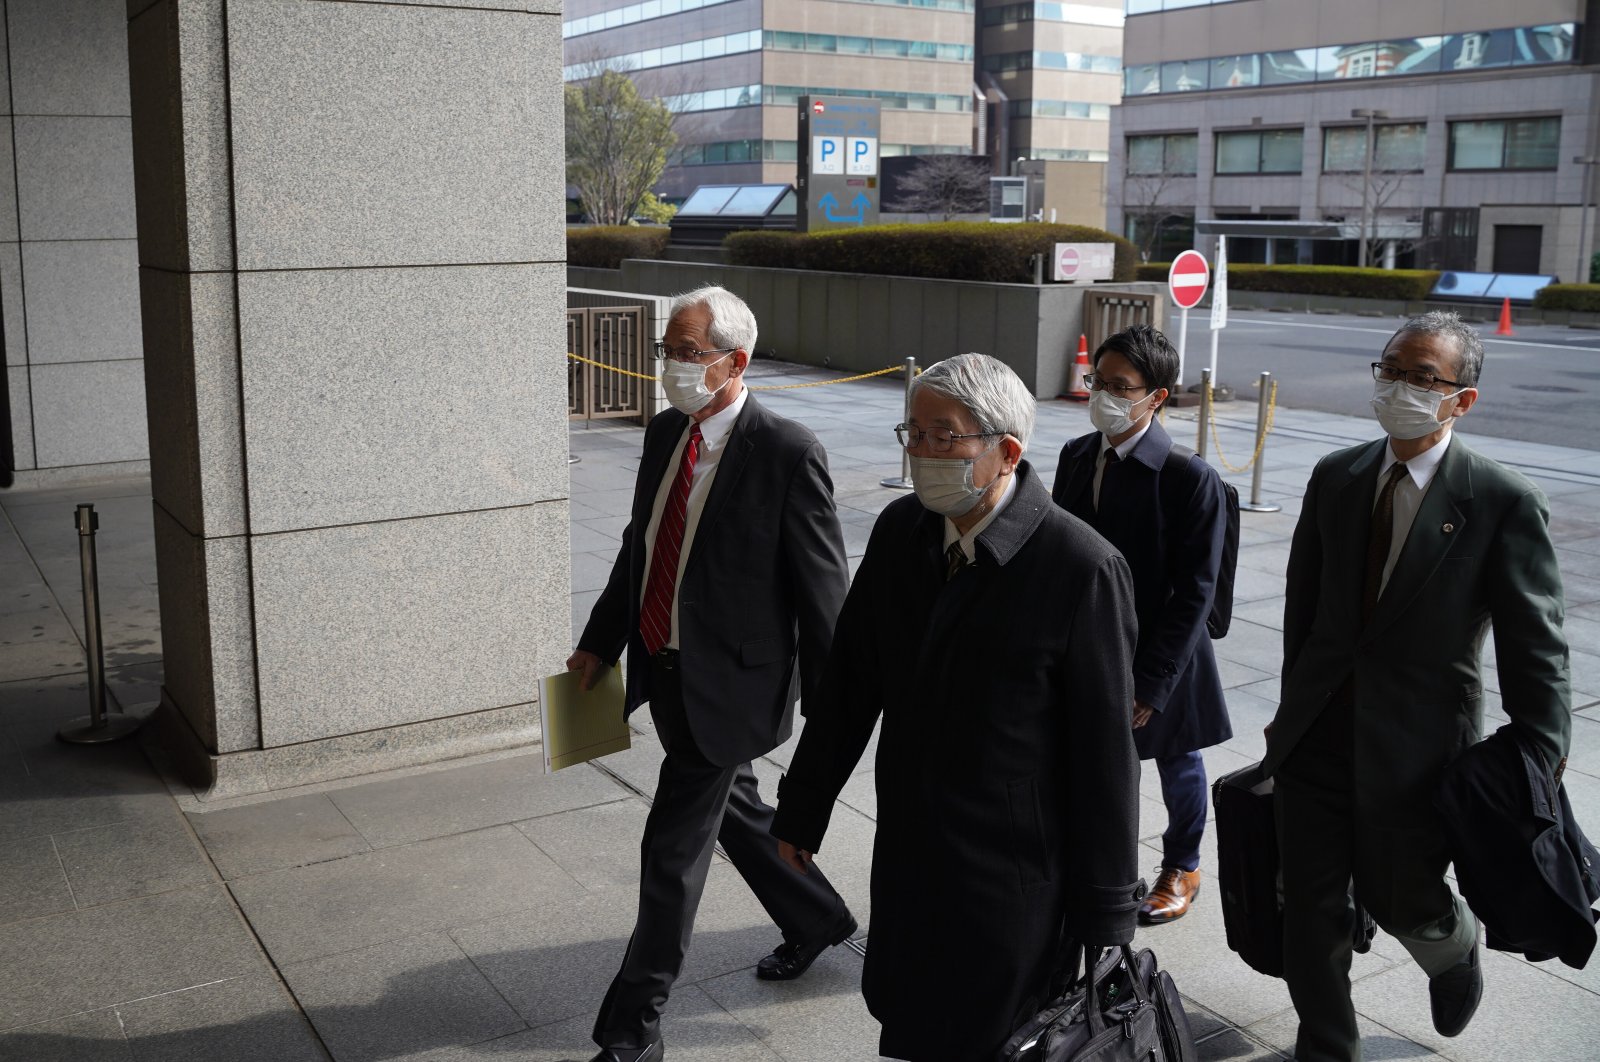 Greg Kelly (L), a former executive of Japanese automaker Nissan, arrives at the Tokyo District Court in Tokyo, Japan, March 3, 2022. (AP Photo)